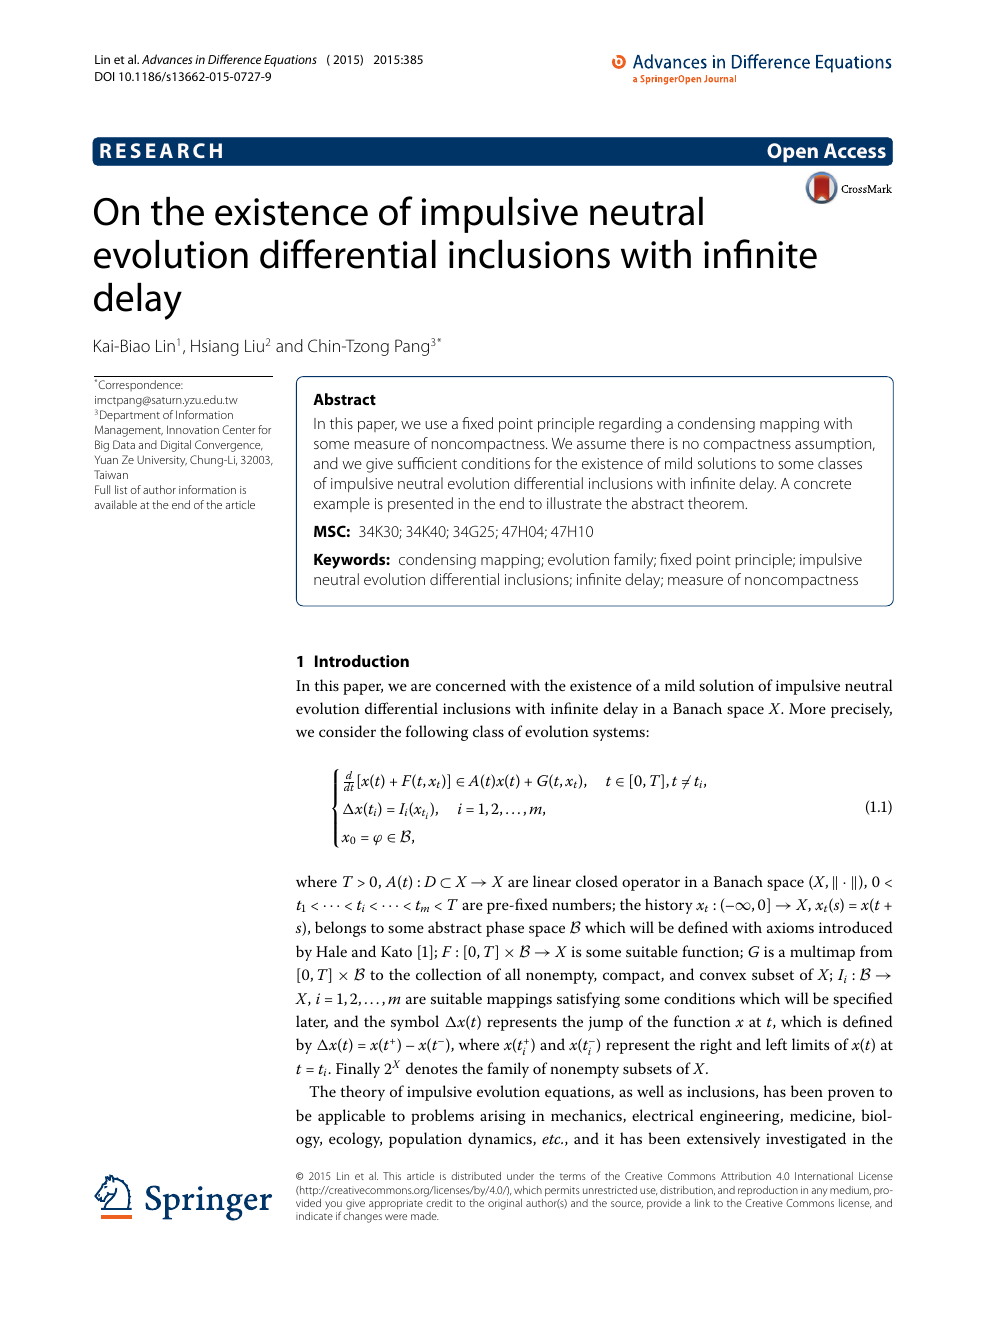 On The Existence Of Impulsive Neutral Evolution Differential Inclusions With Infinite Delay Topic Of Research Paper In Mathematics Download Scholarly Article Pdf And Read For Free On Cyberleninka Open Science Hub